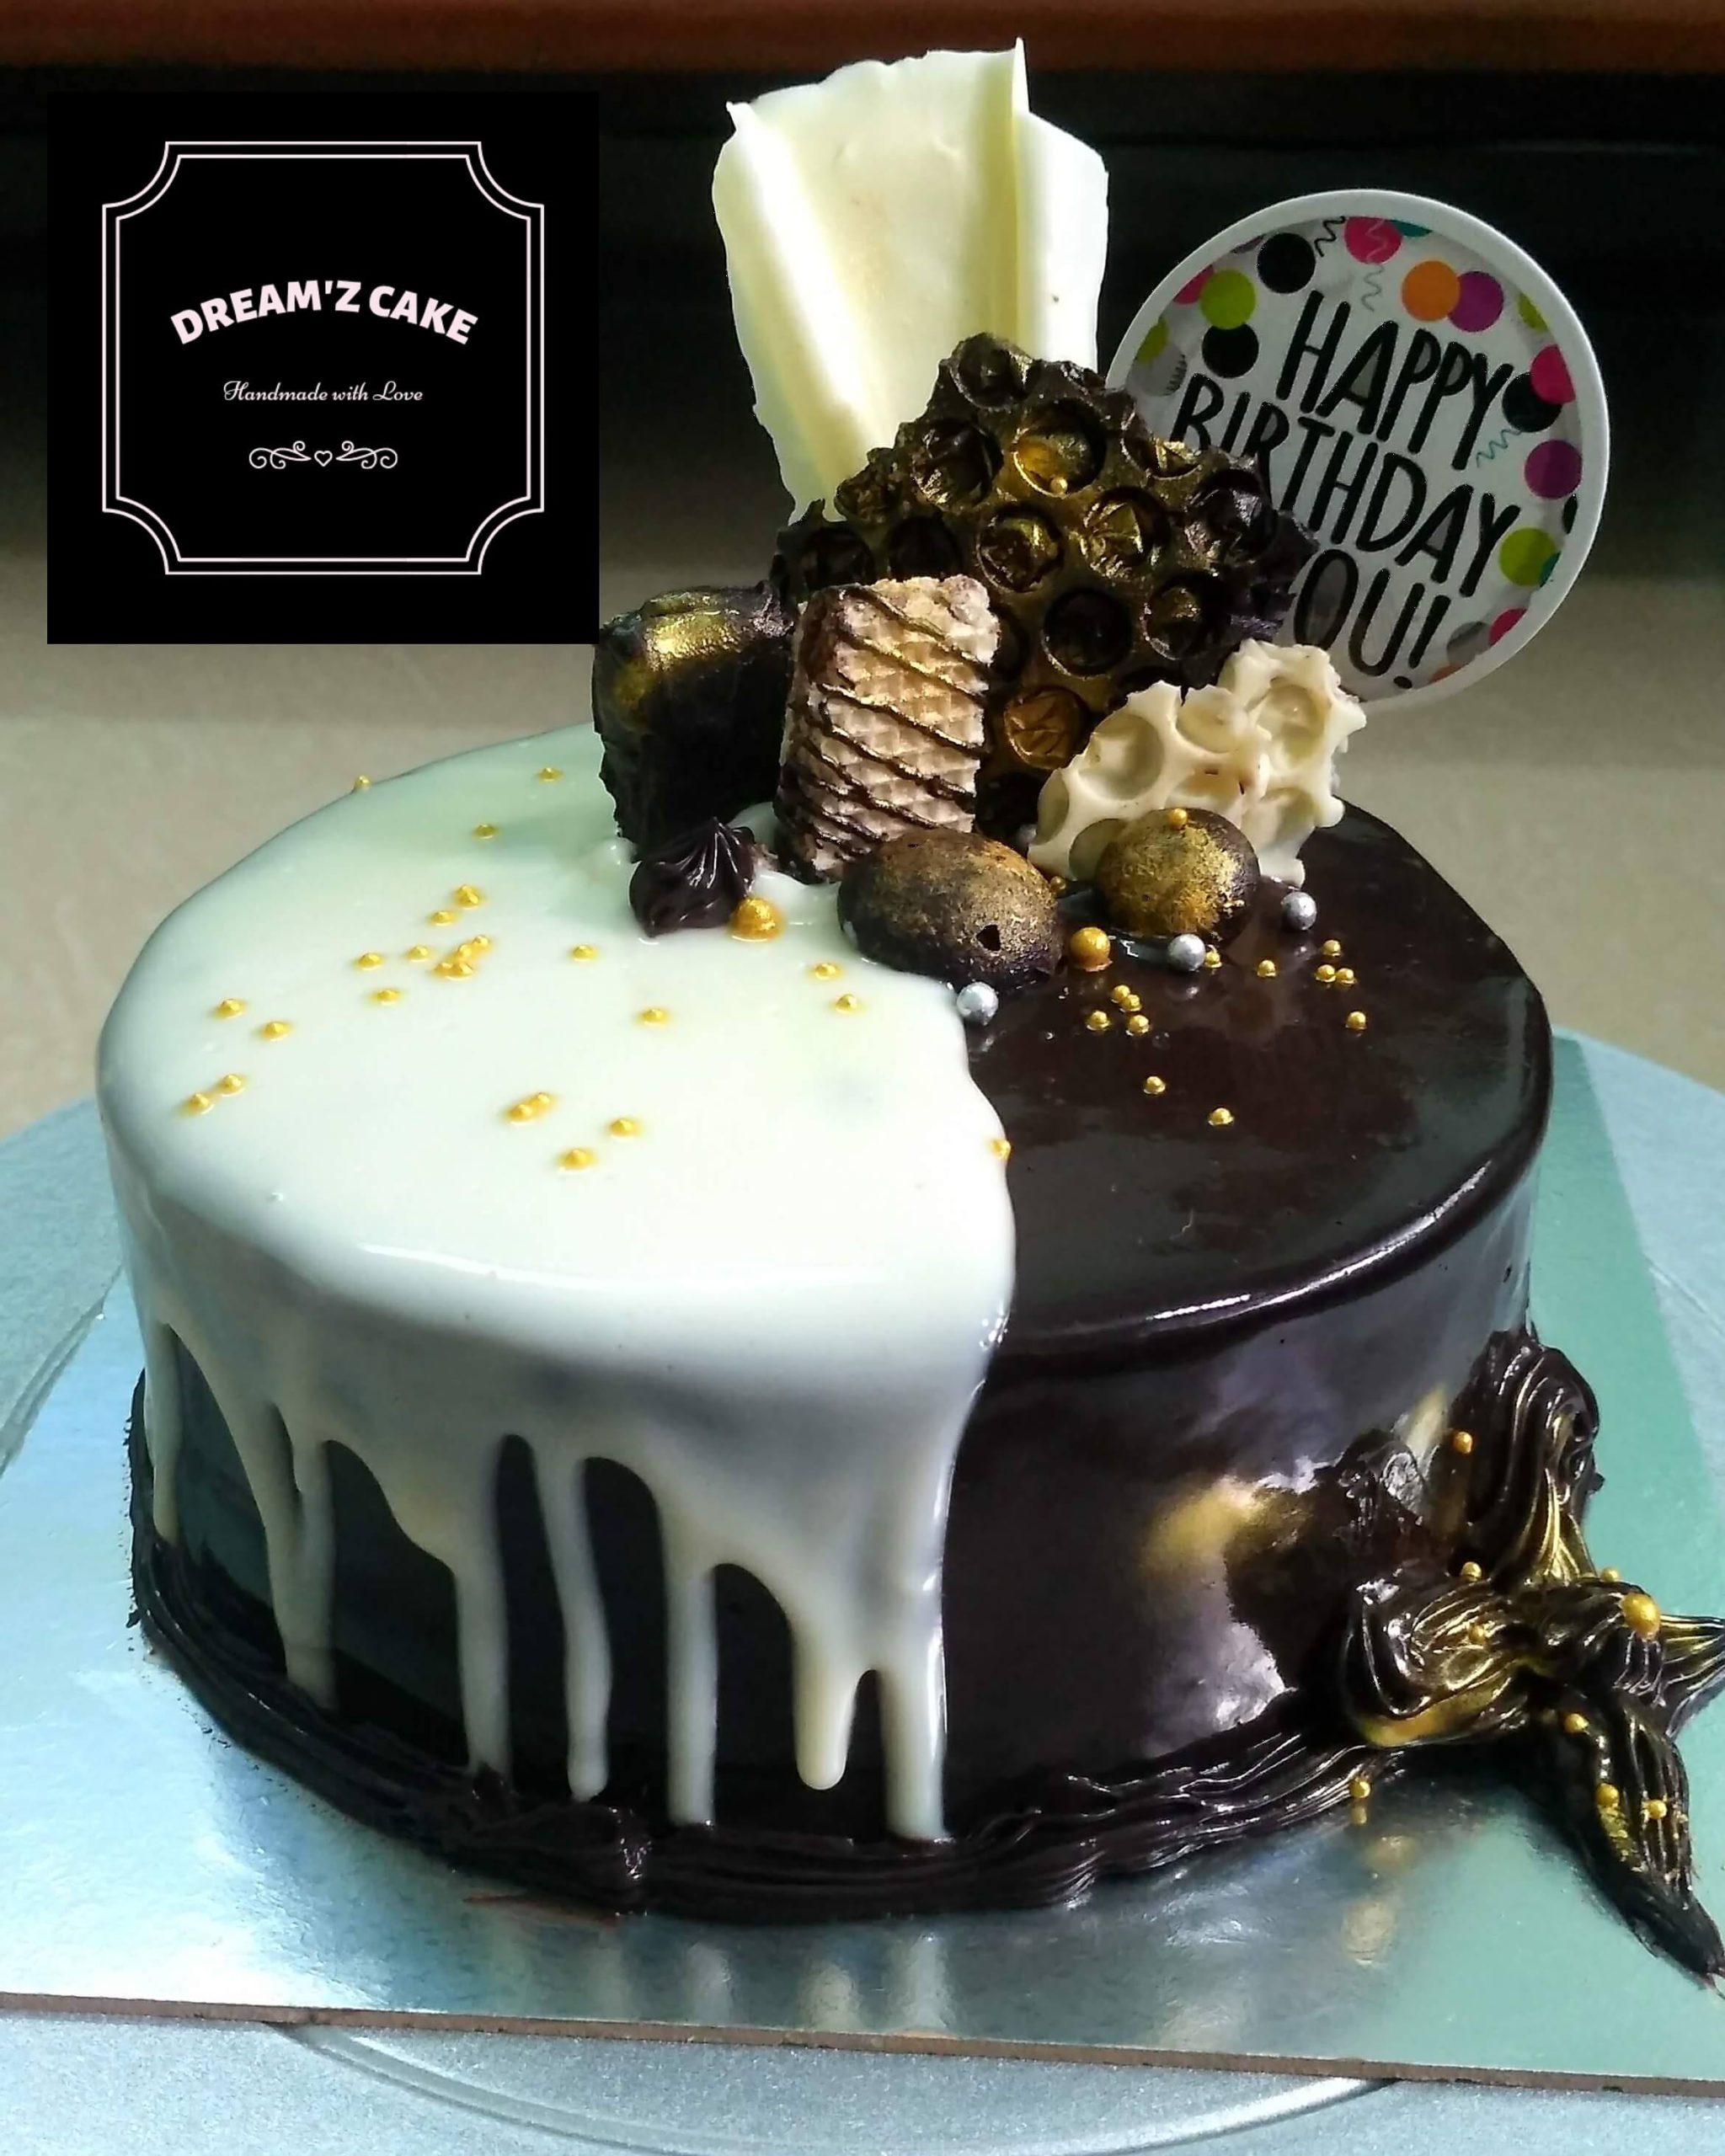 Chocolate Truffle Cake with chocolates Loaded Designs, Images, Price Near Me